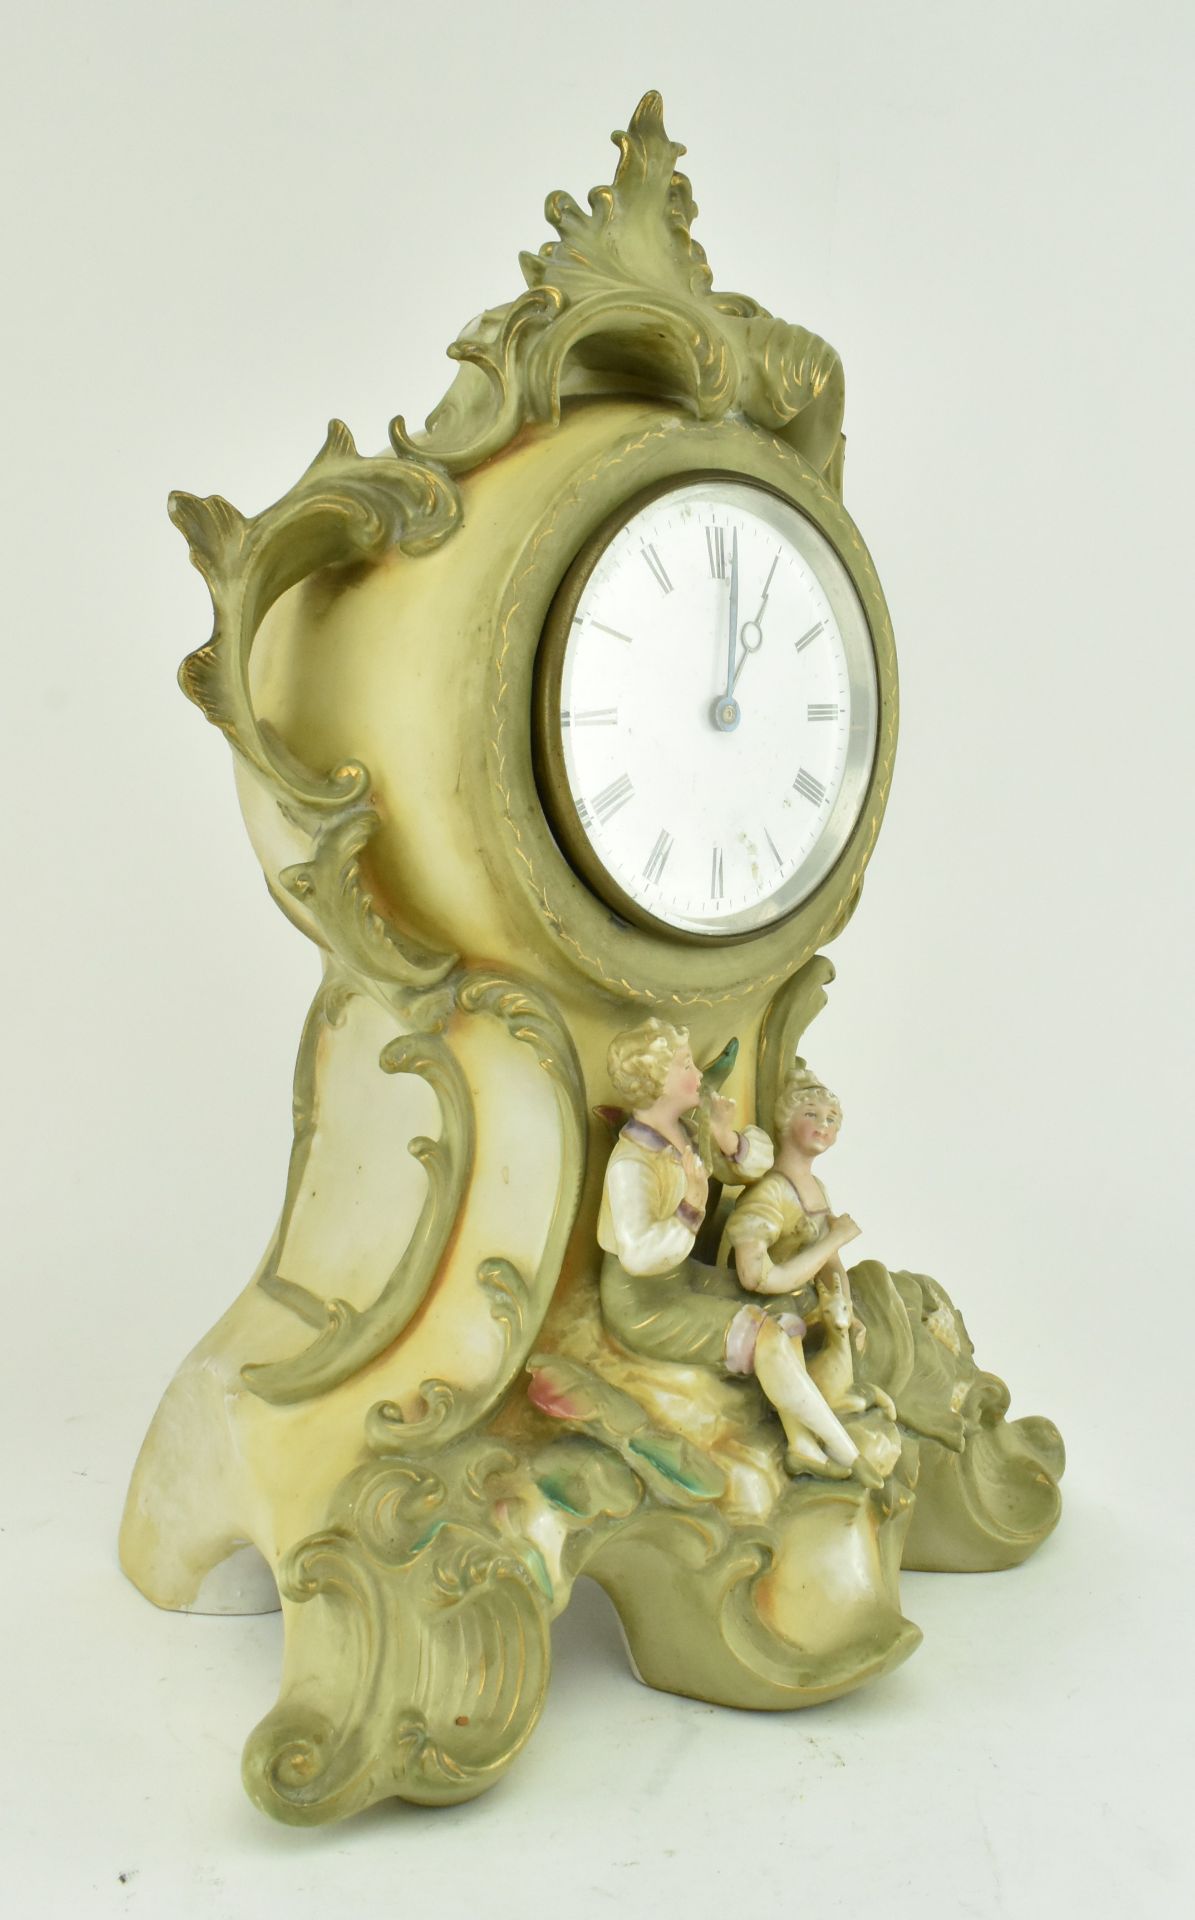 19TH CENTURY CONTINENTAL BISQUE PORCELAIN MANTLE CLOCK - Image 2 of 10